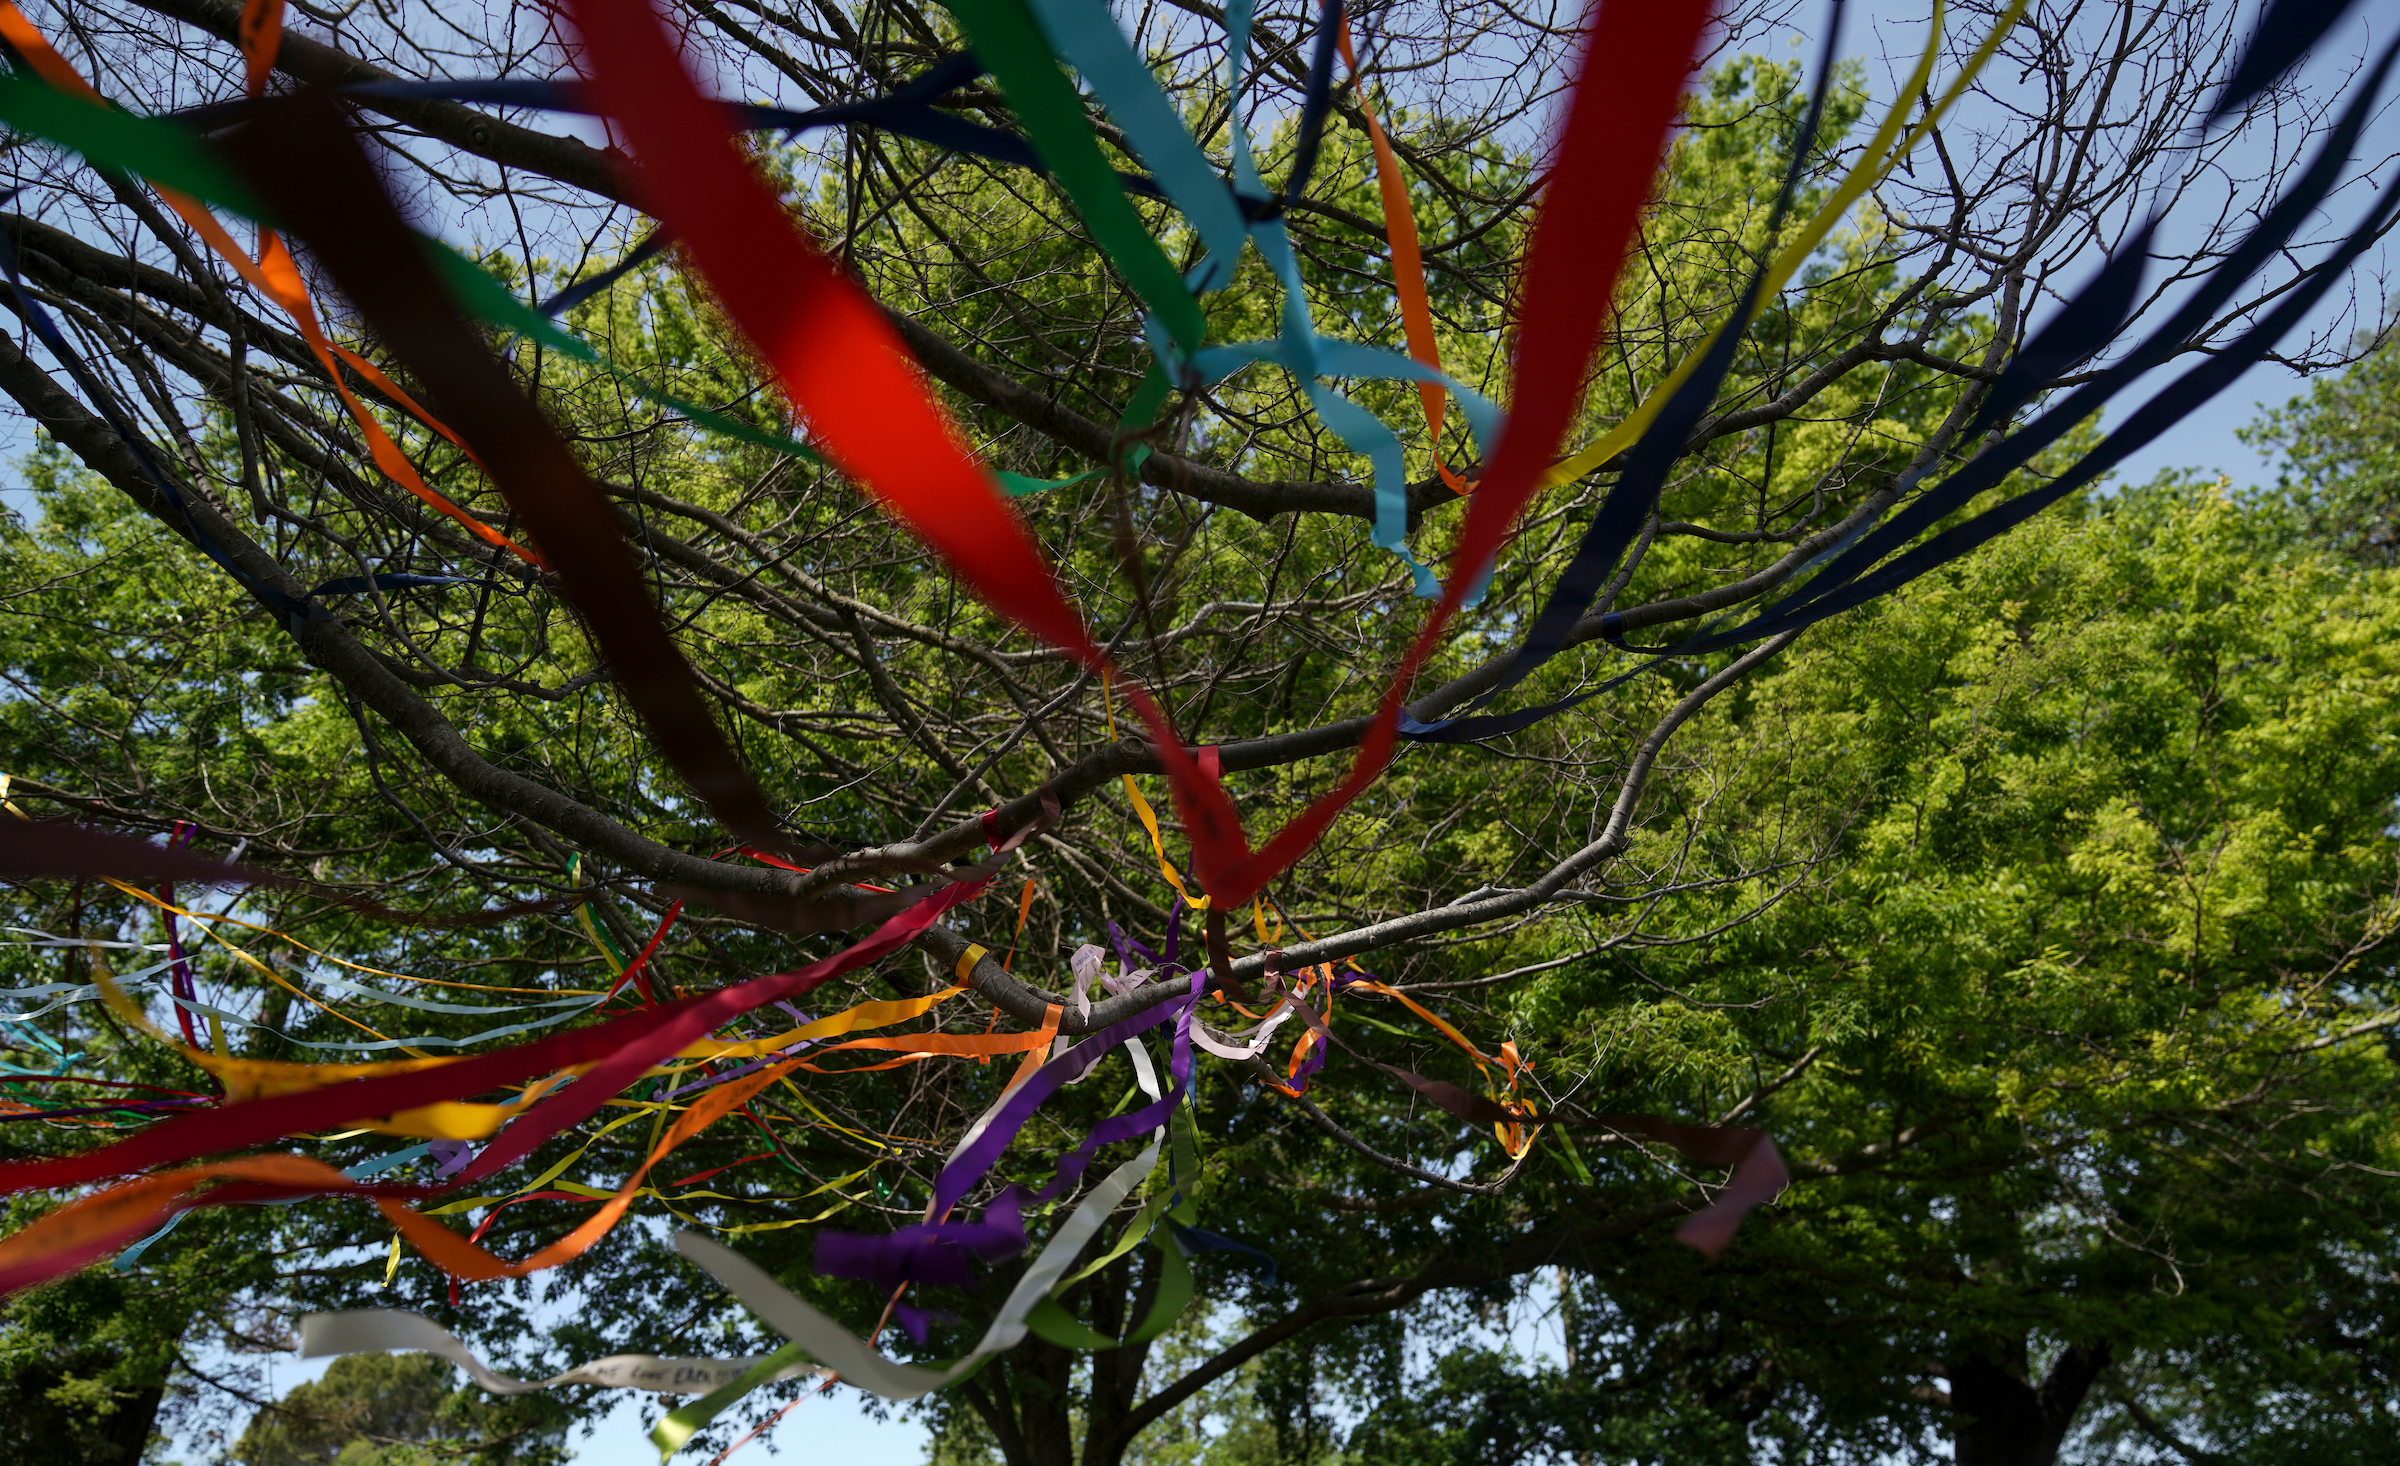 Colorful ribbons hanging from trees